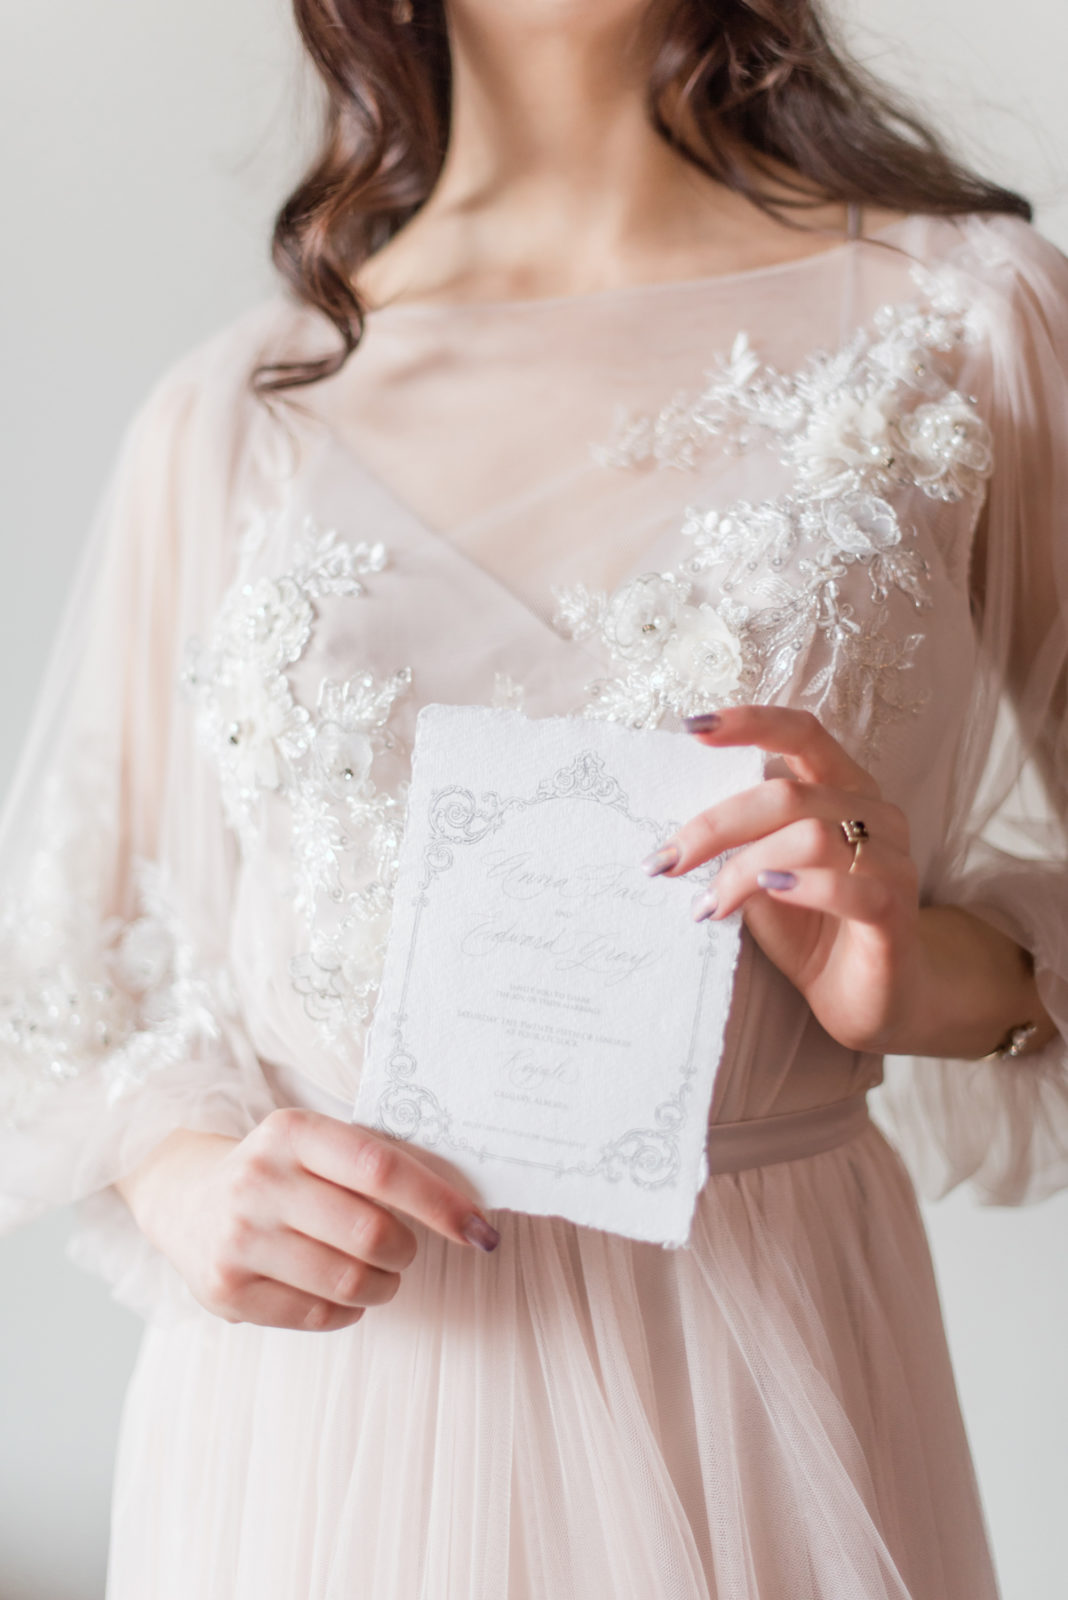 Romantically Regal Bridal Inspiration at the Royale YYC - wedding inspiration featured on Brontë Bride